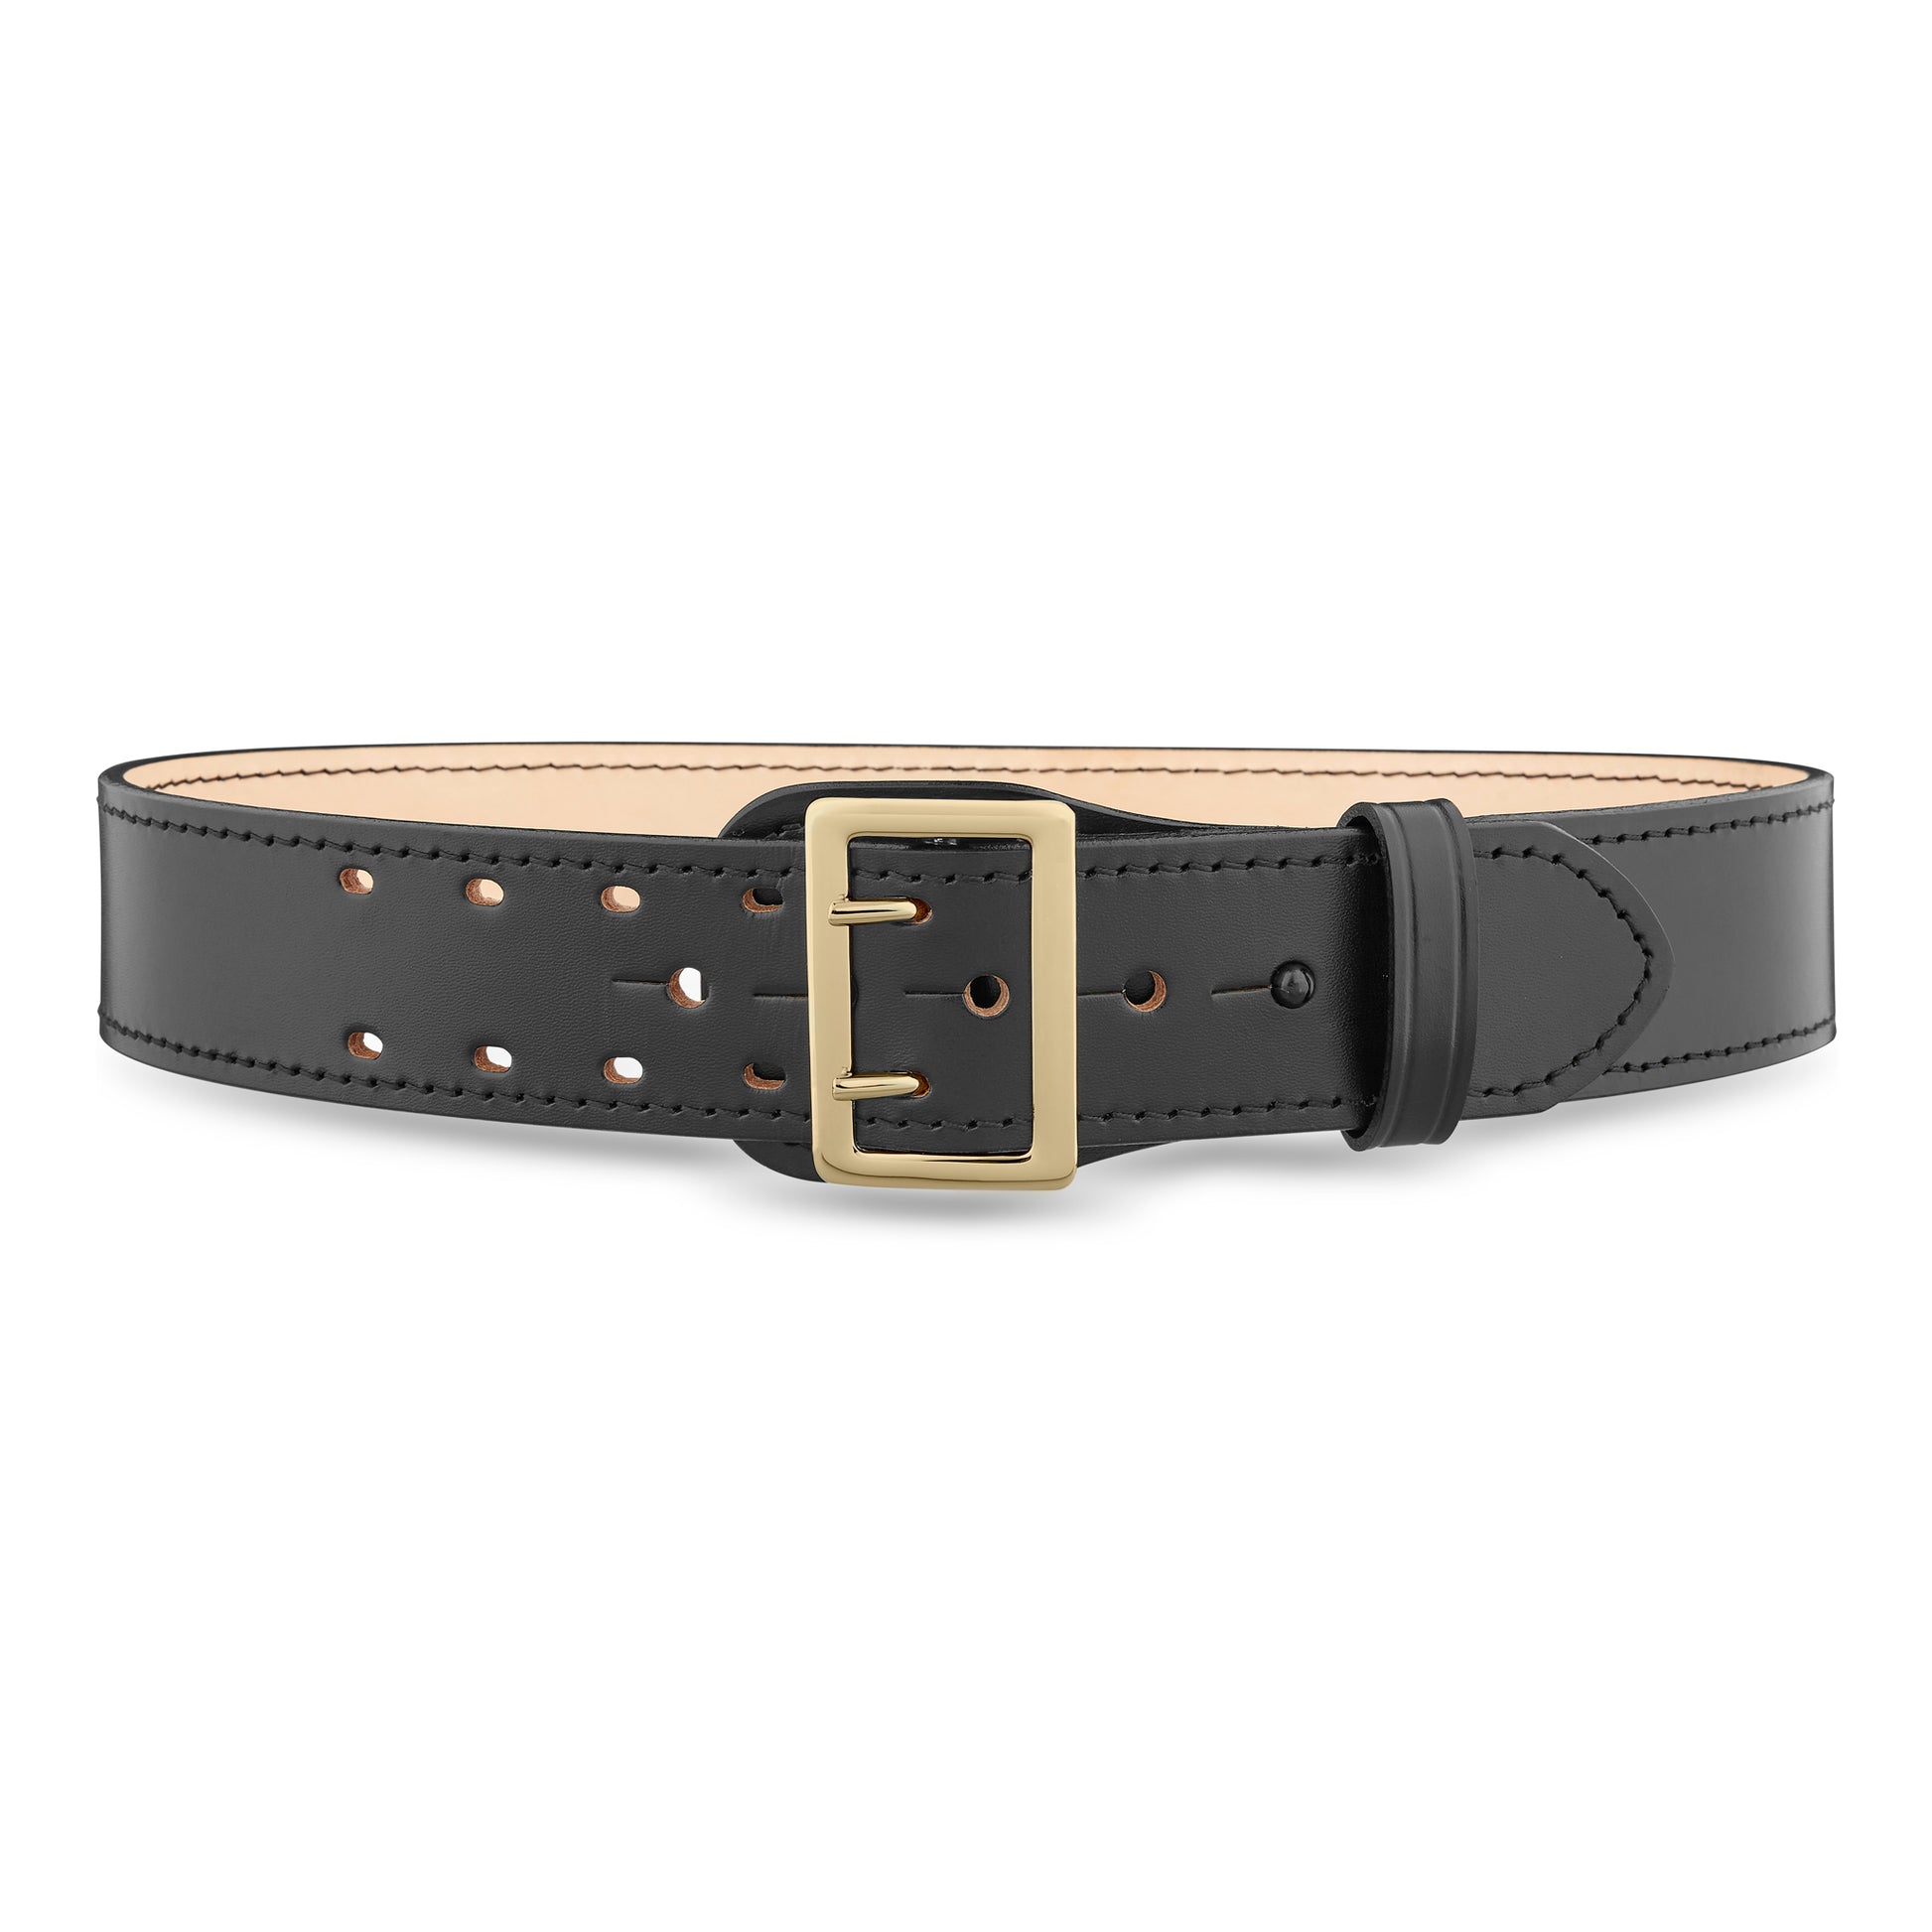 2-1/4" Classic Leather Sam Browne Police Belt  with gold buckle